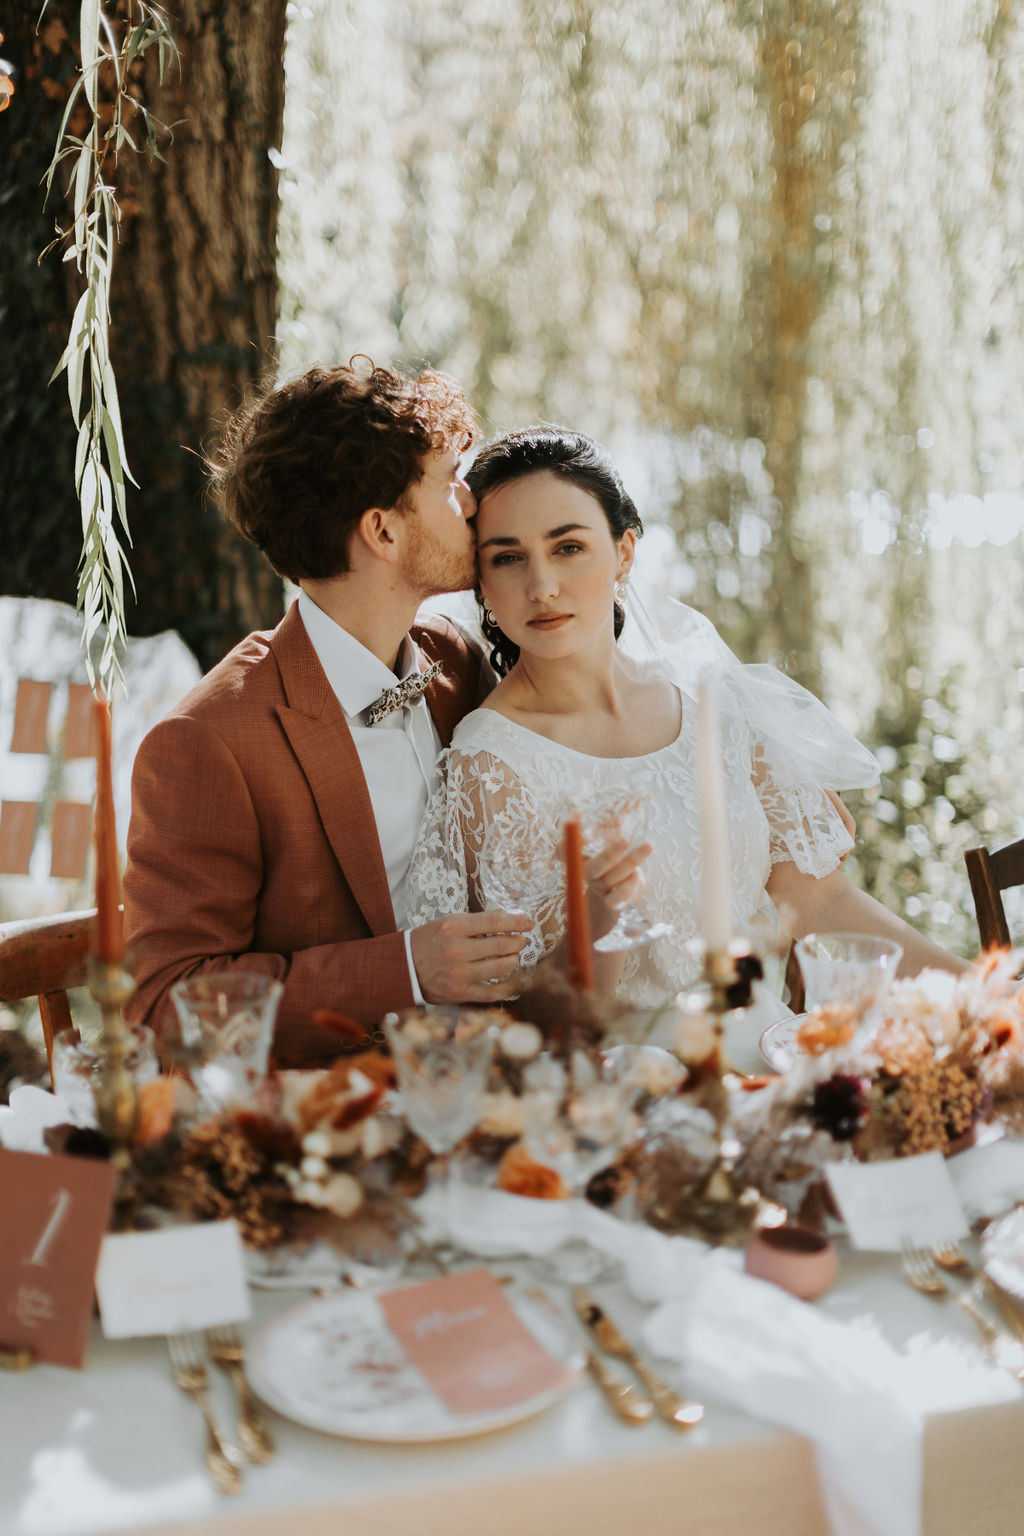 inspirations-mariage-boho-chic-automne-meriamaugustinphotography